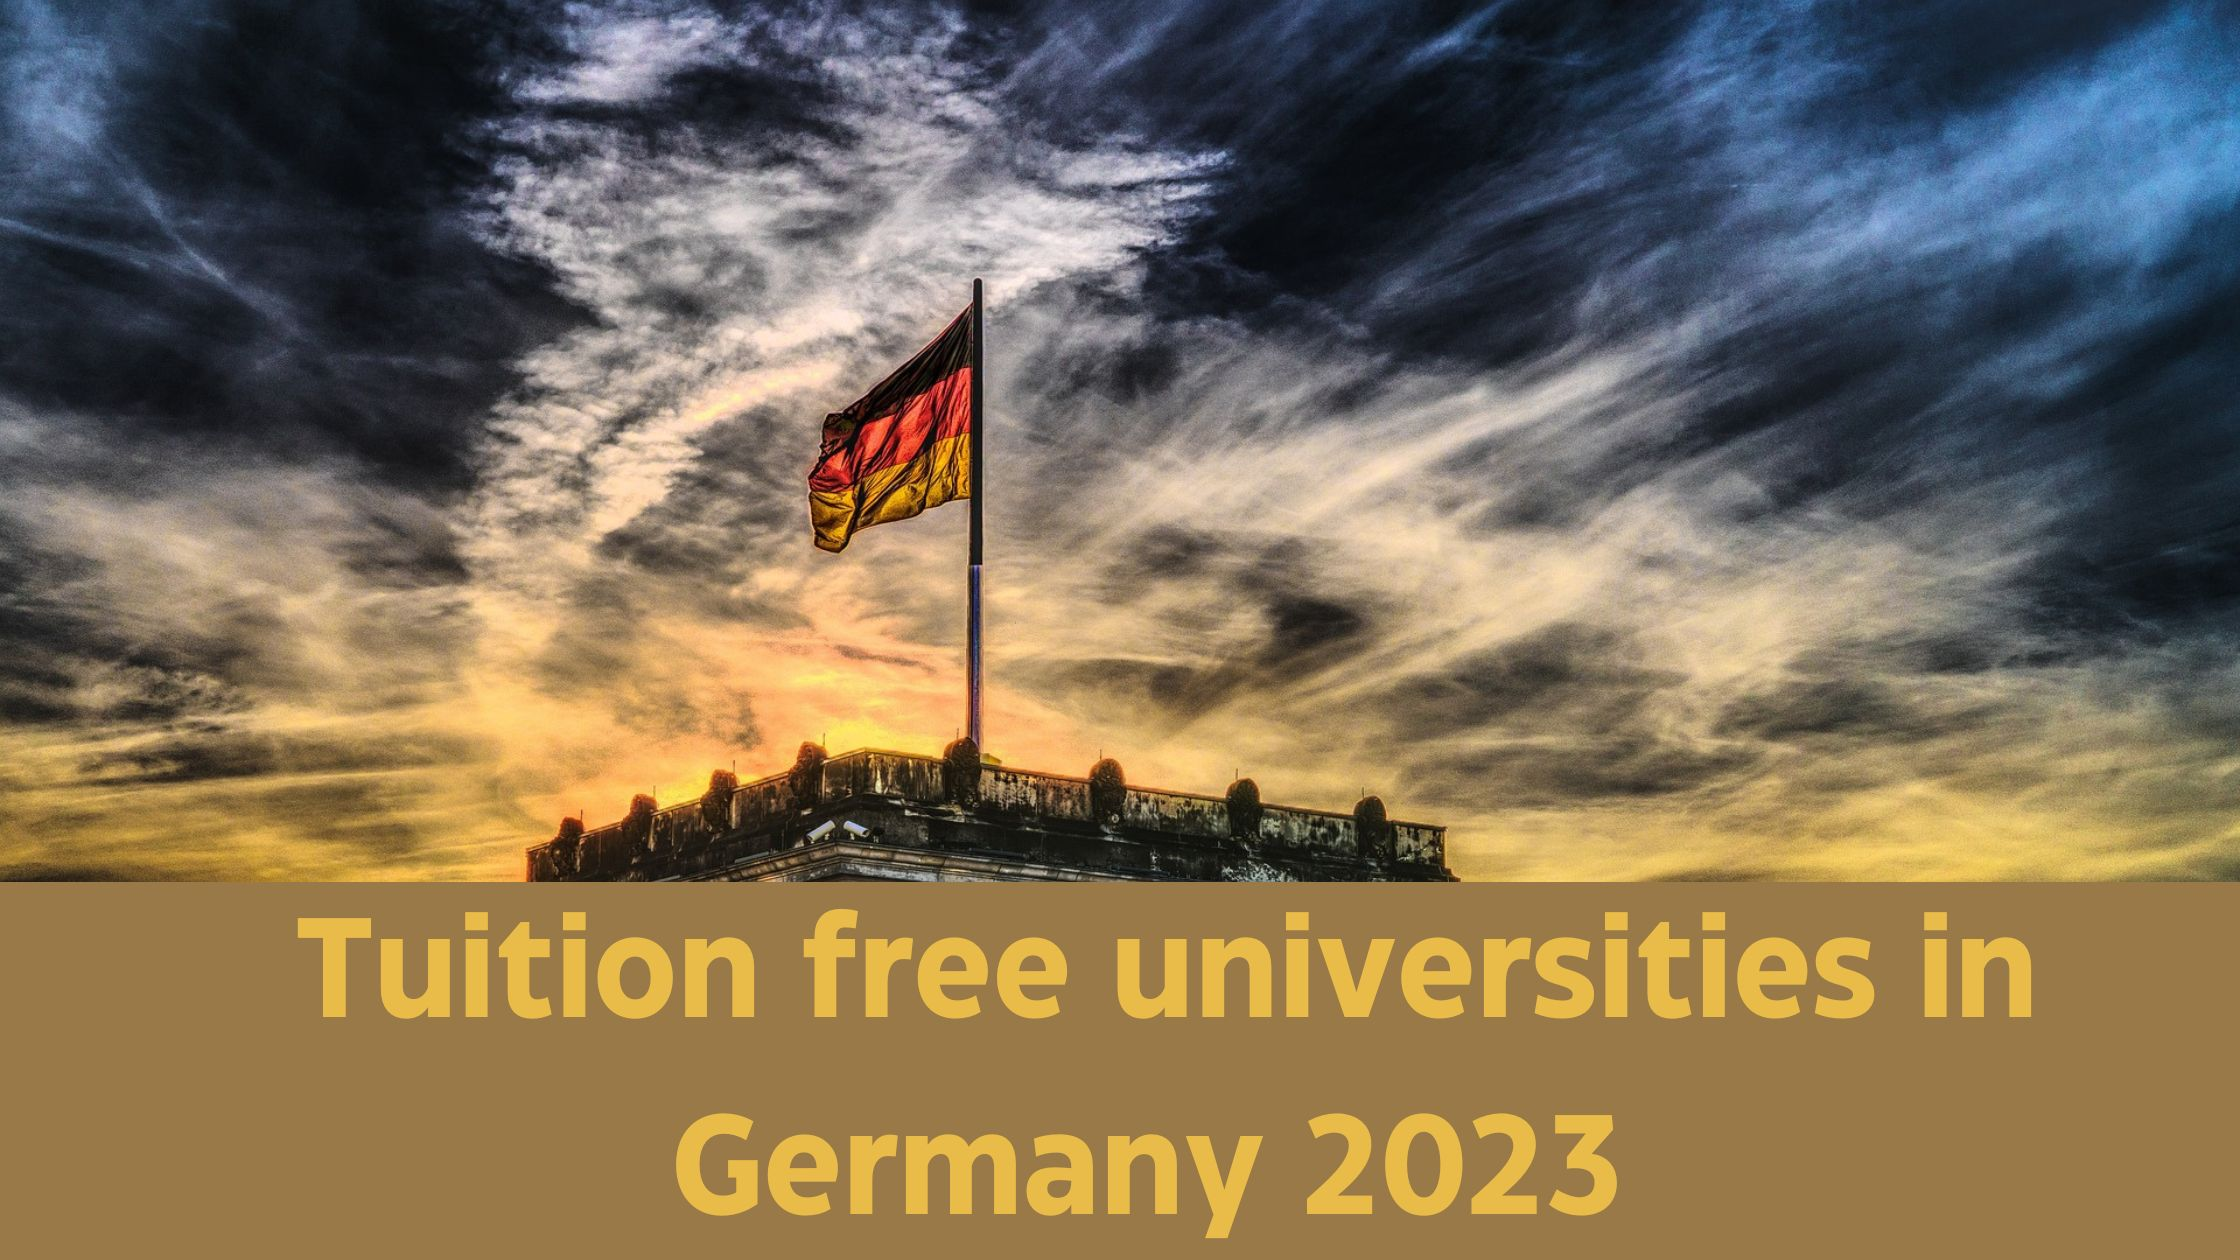 Tuition free universities in Germany 2023